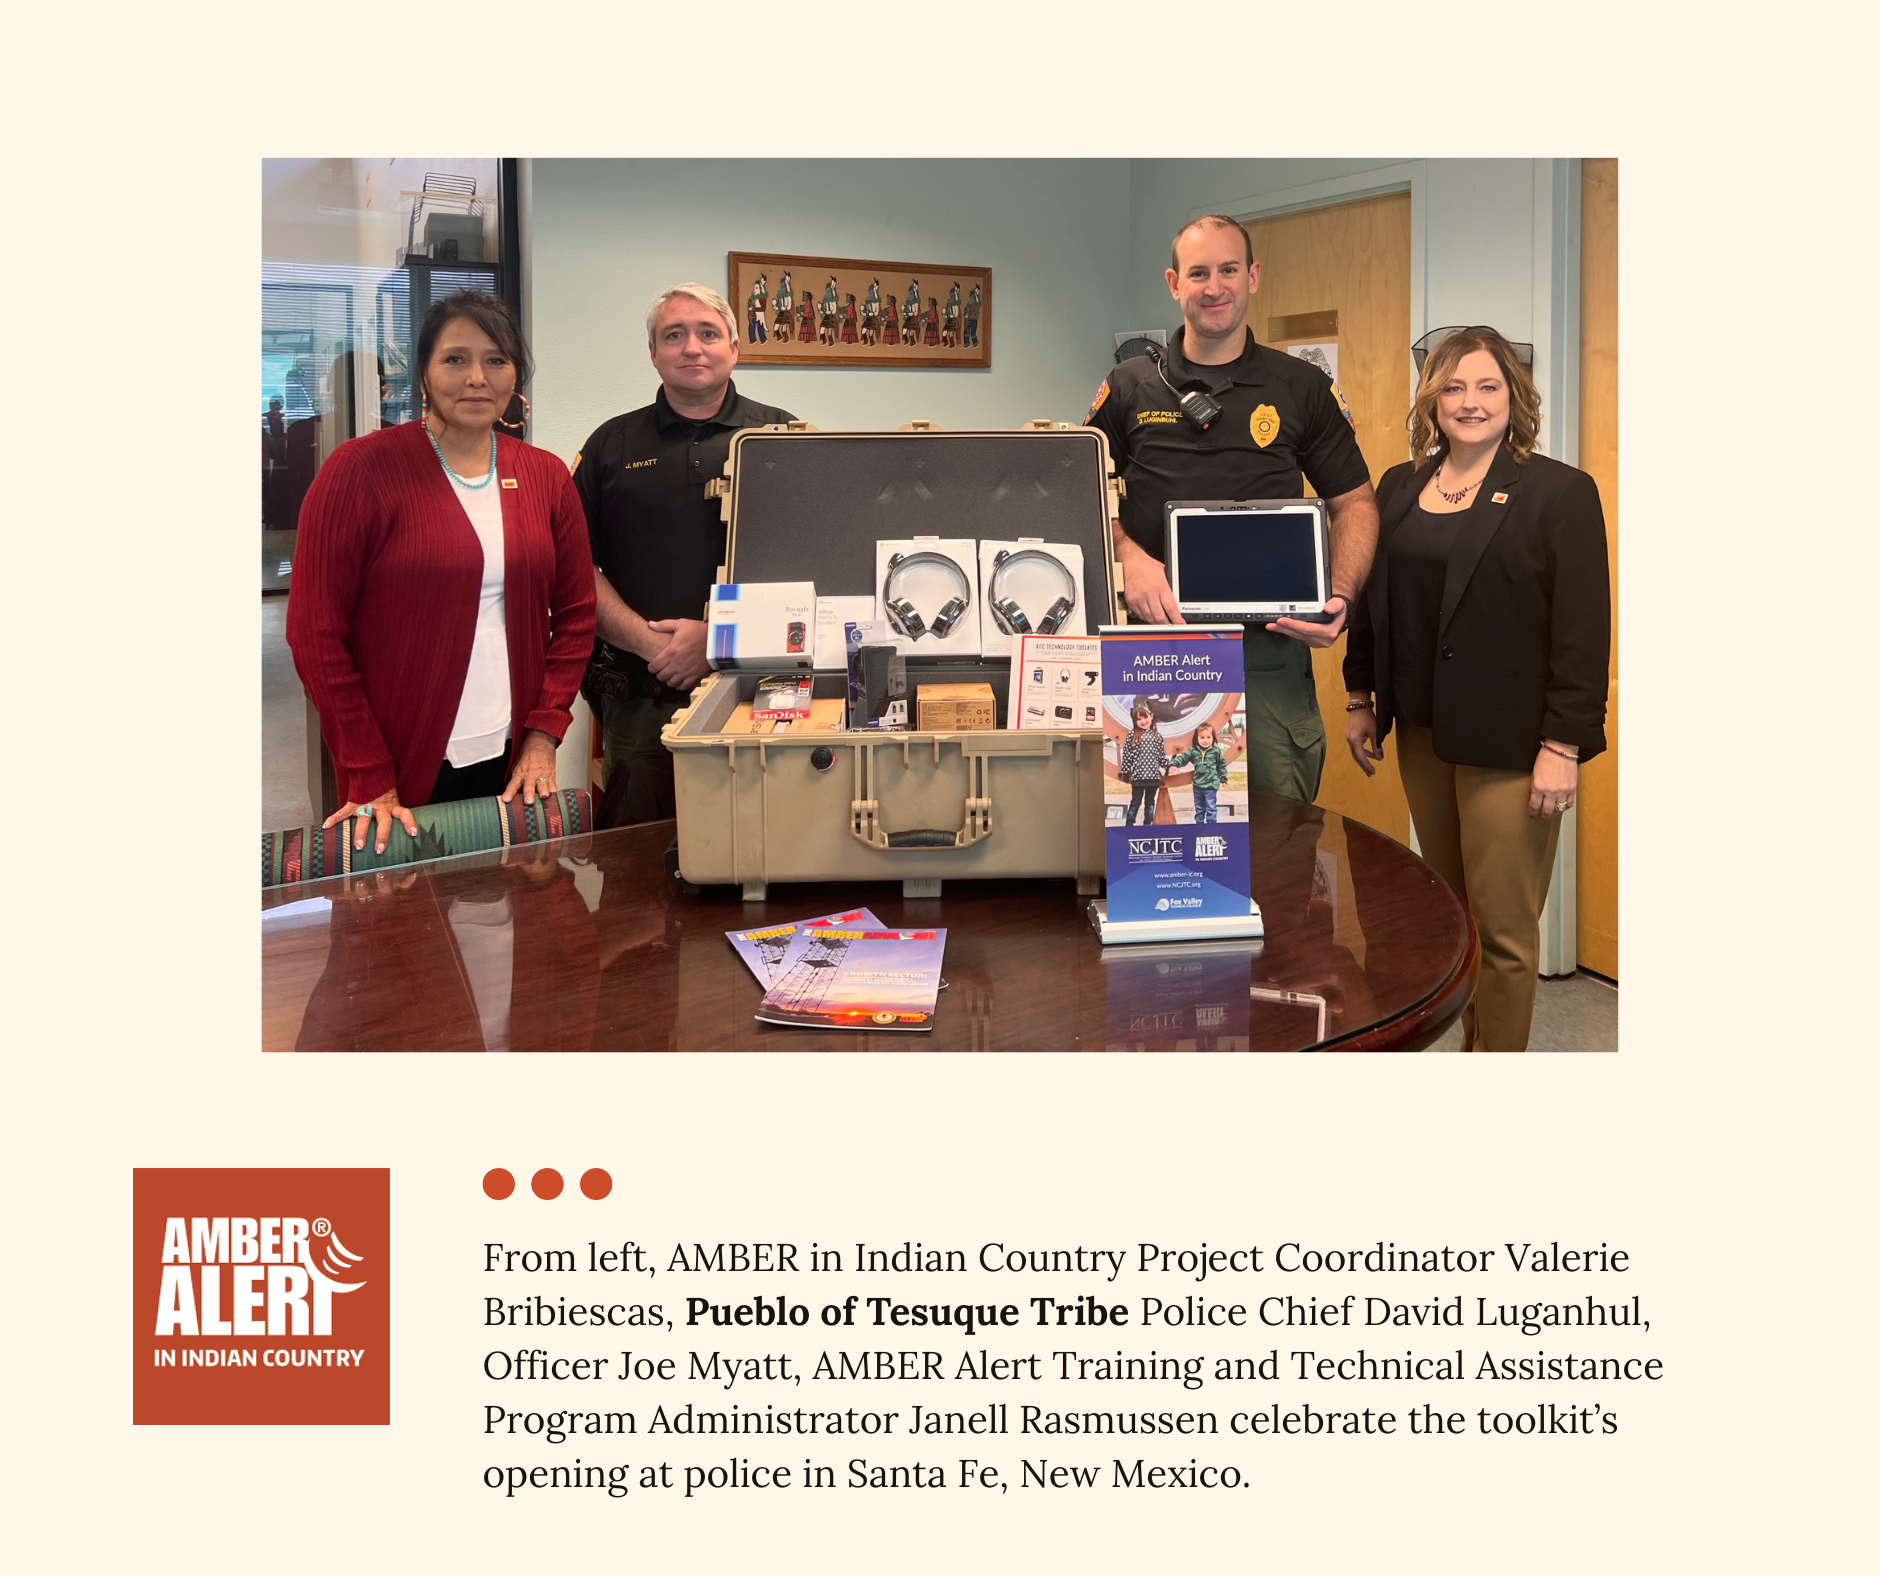 From left, AMBER in Indian Country Project Coordinator Valerie Bribiescas, Pueblo of Tesuque Tribe Police Chief David Luganhul, Officer Joe Myatt, AMBER Alert Training and Technical Assistance Program Administrator Janell Rasmussen celebrate the toolkit’s opening at police in Santa Fe, New Mexico.